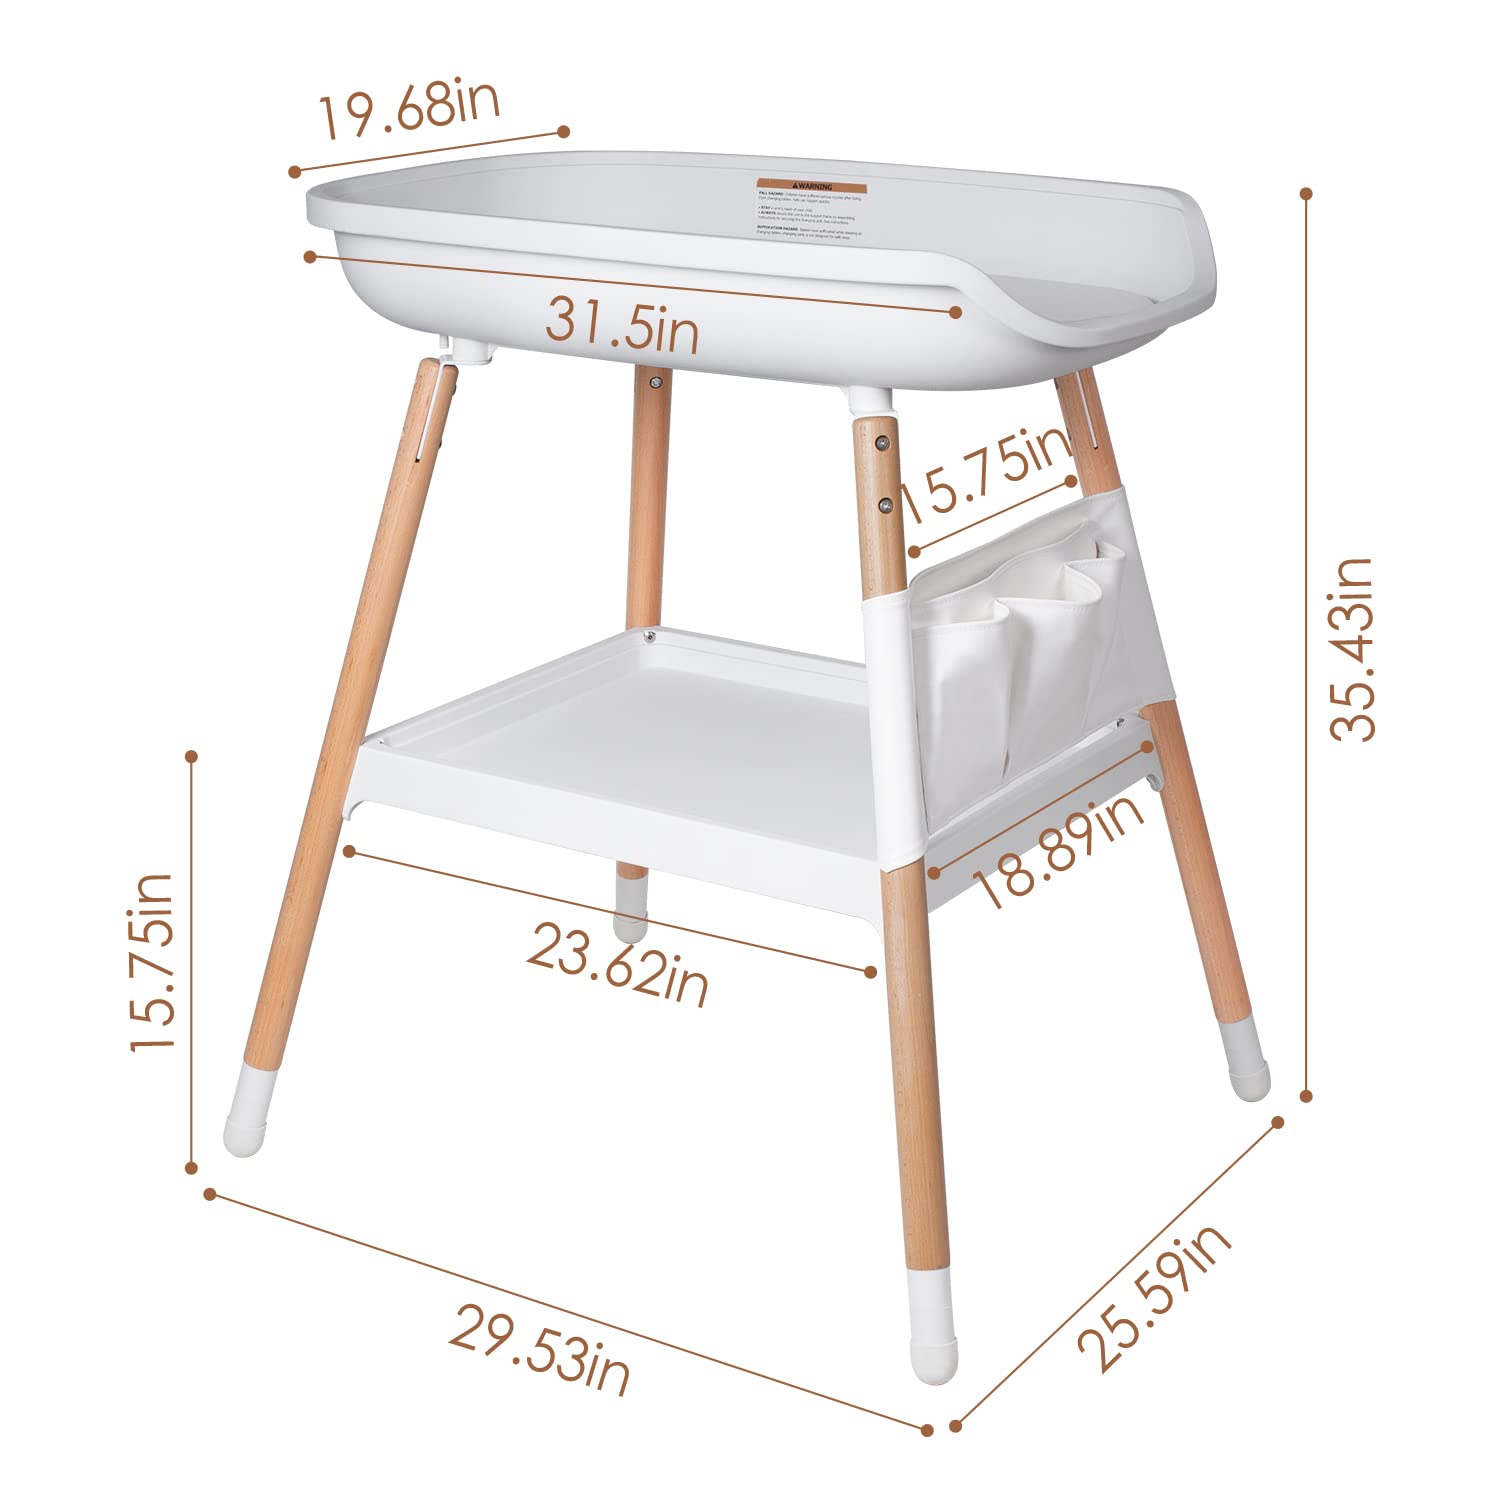 Baby Changing Table Diaper Changing Tables, Height Ajustable Nursery Changing and Dressing Table Station with Changing Pad Storage Rack Pockets for Newborns Babies and Infants, White